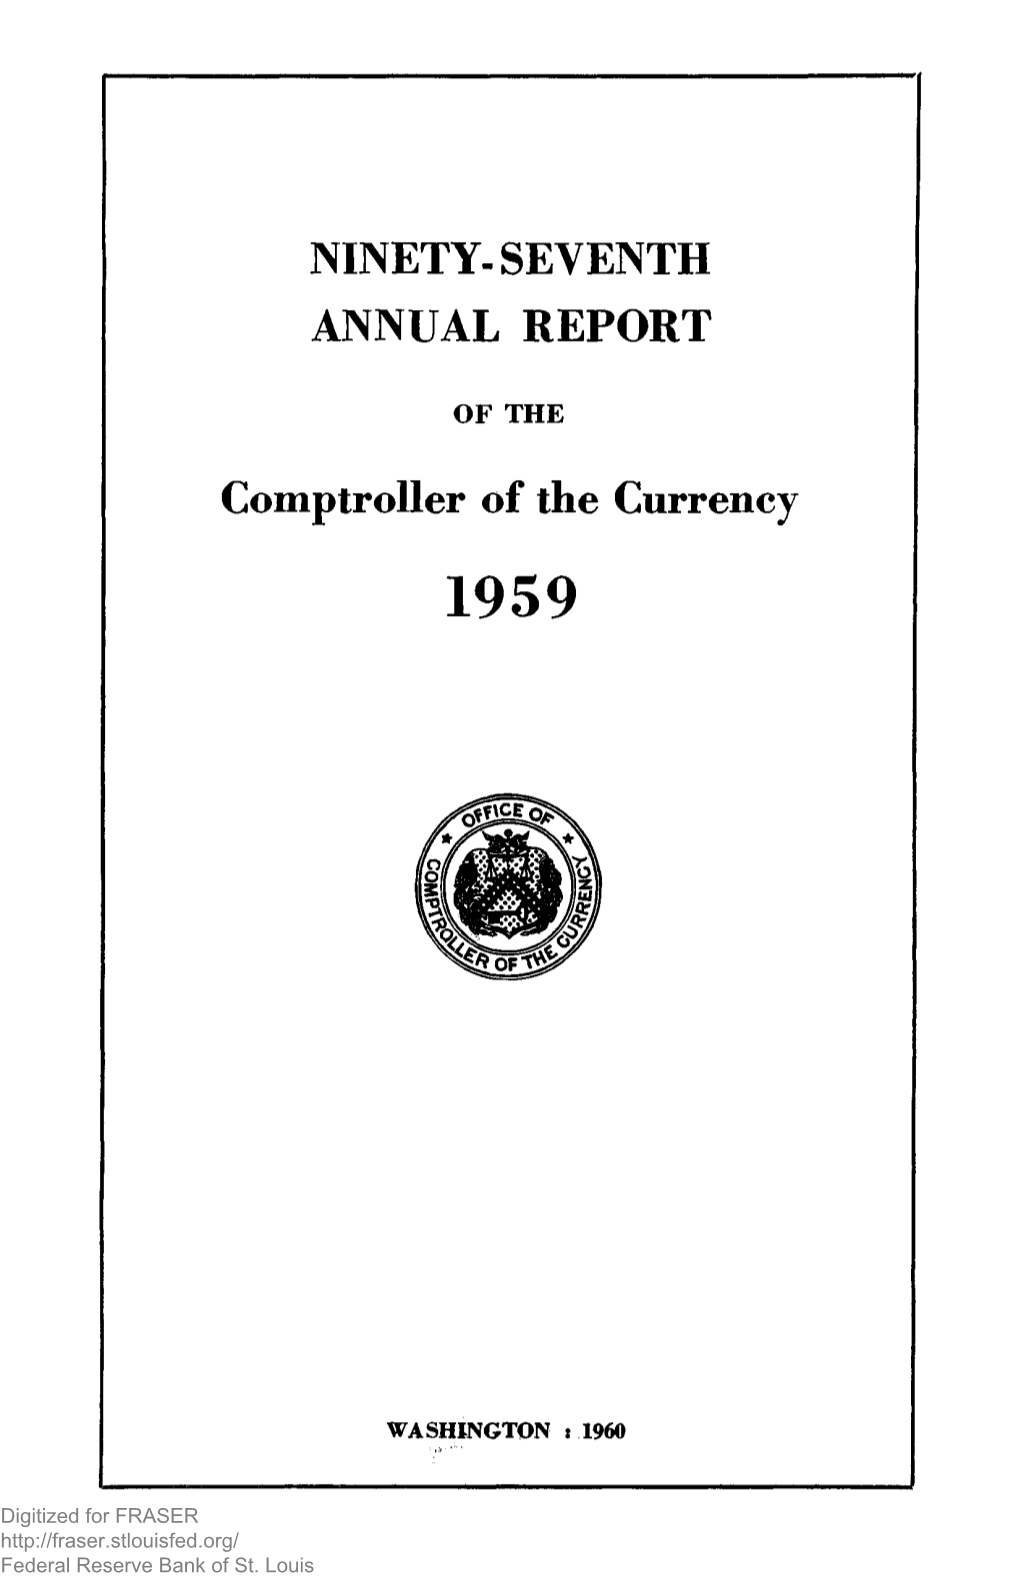 Annual Report of the Comptroller of the Currency 1959